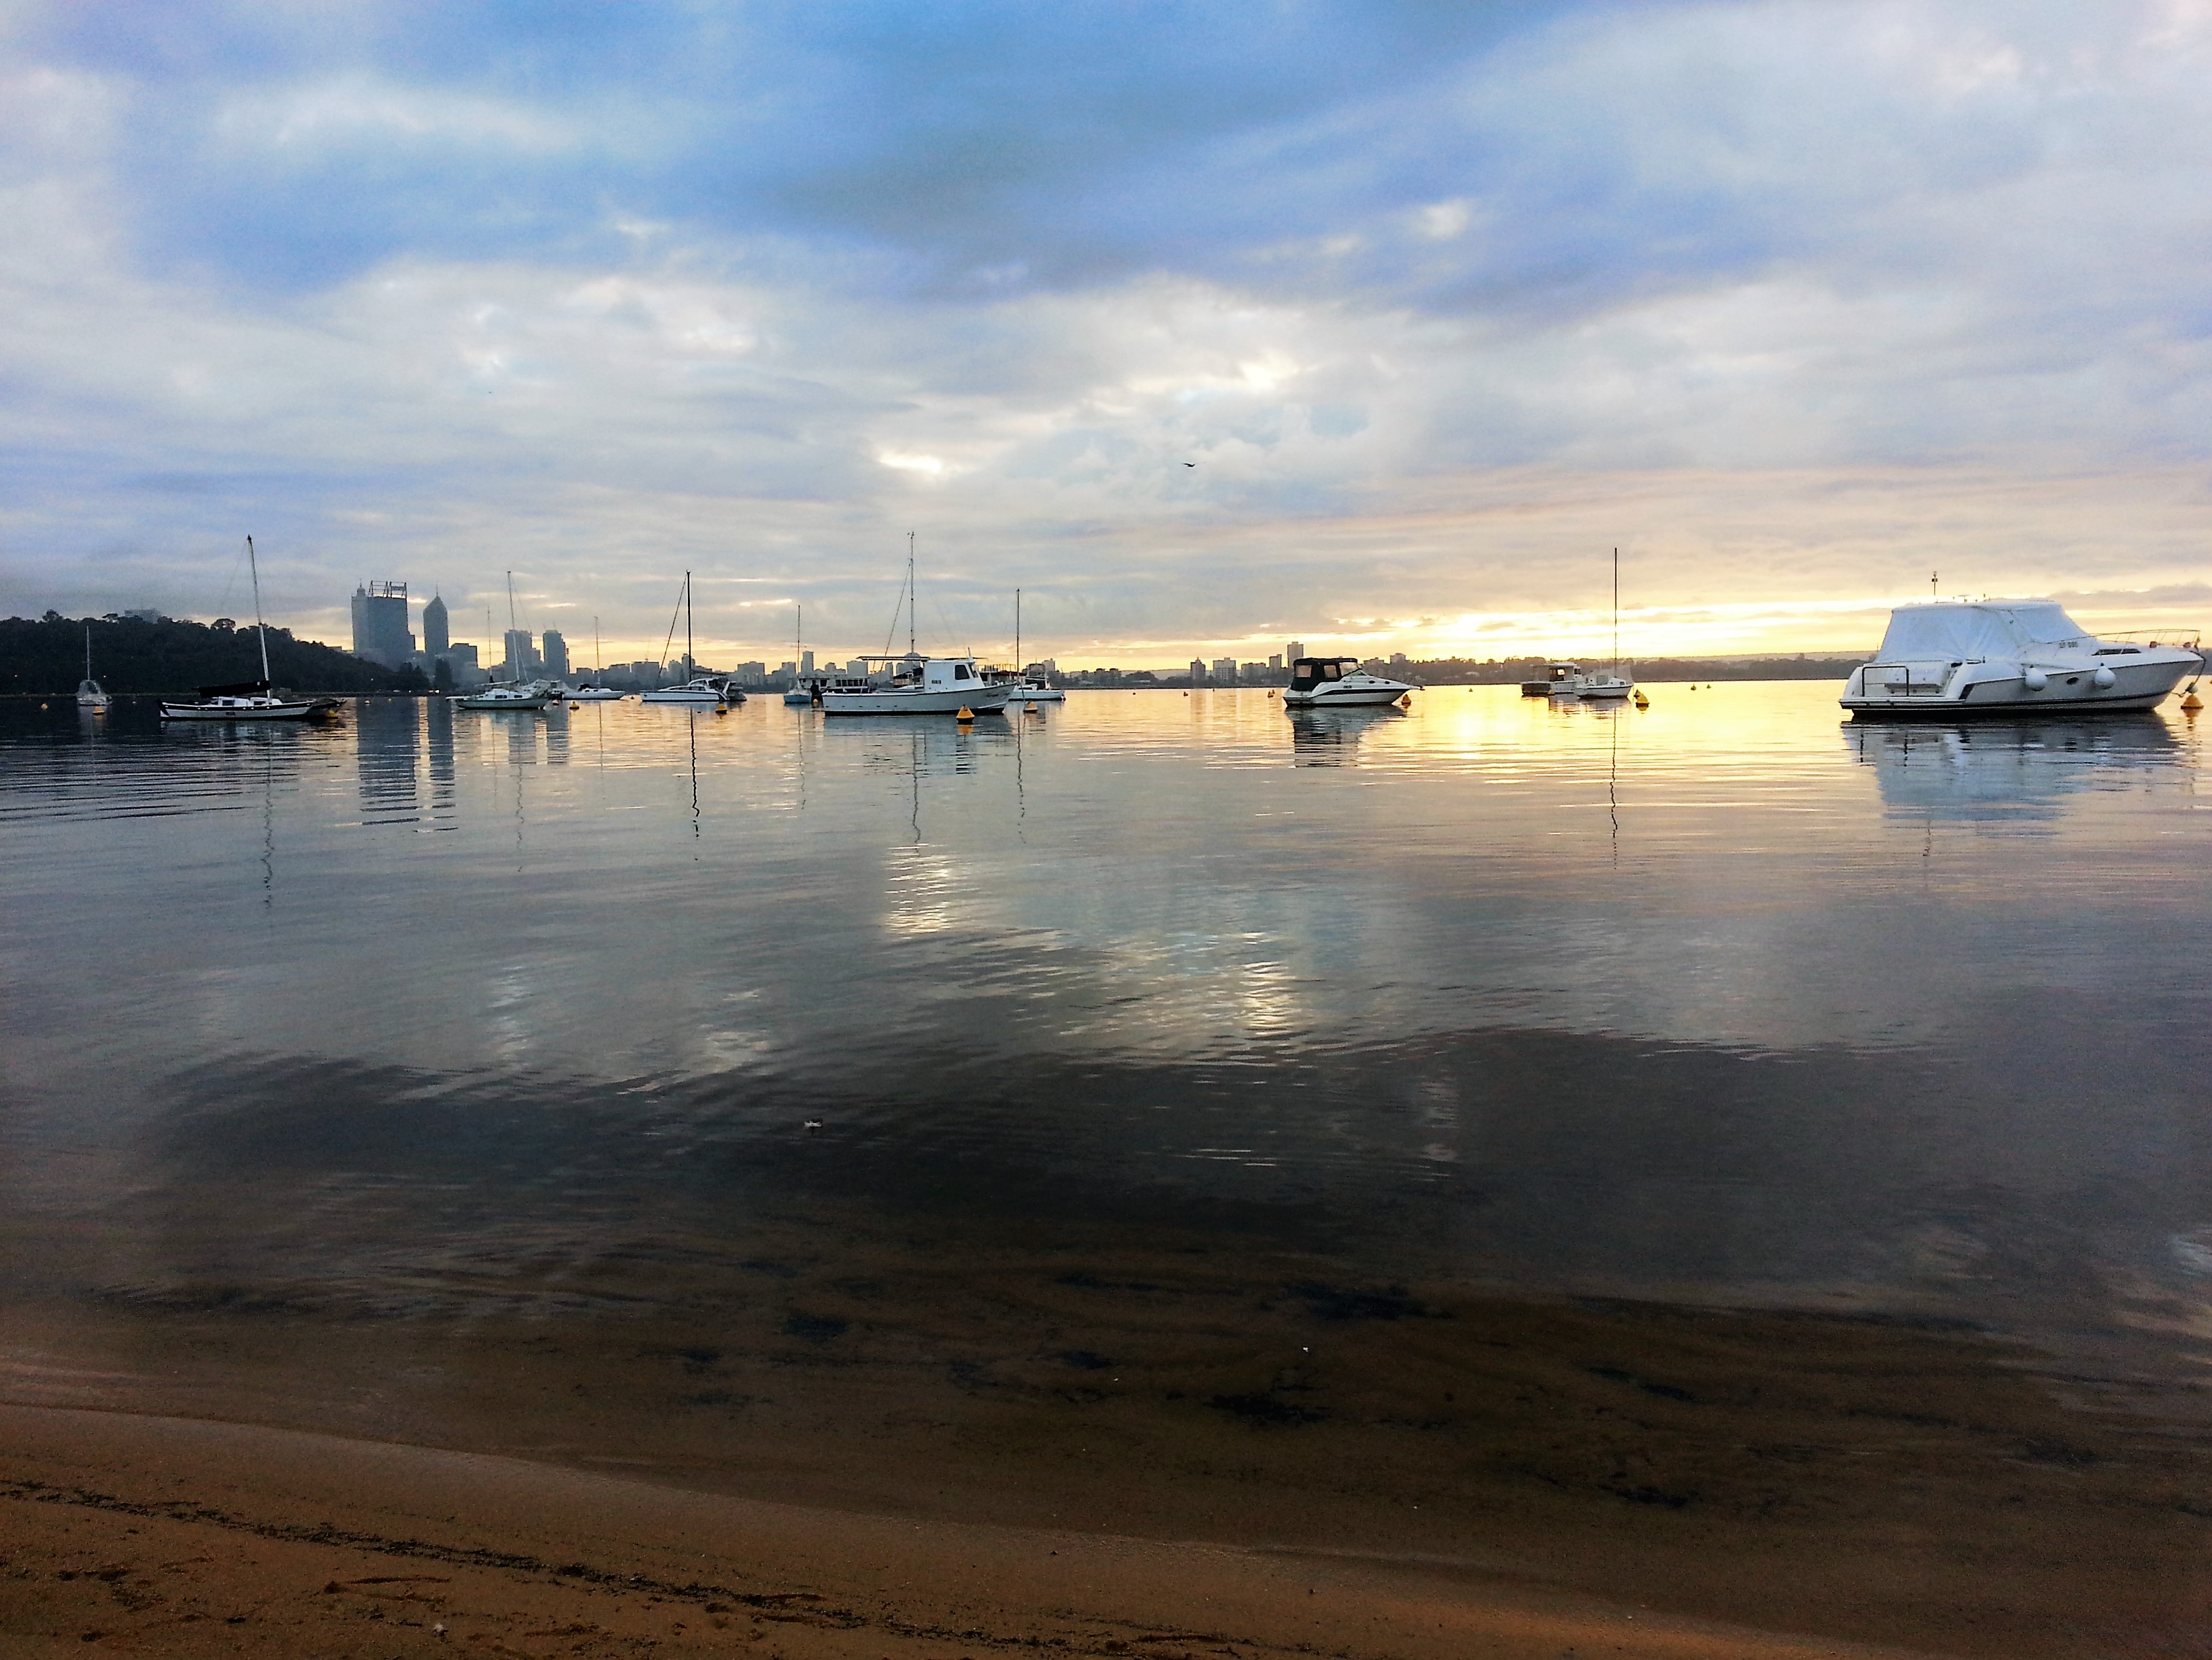 Perth's mighty Swan River